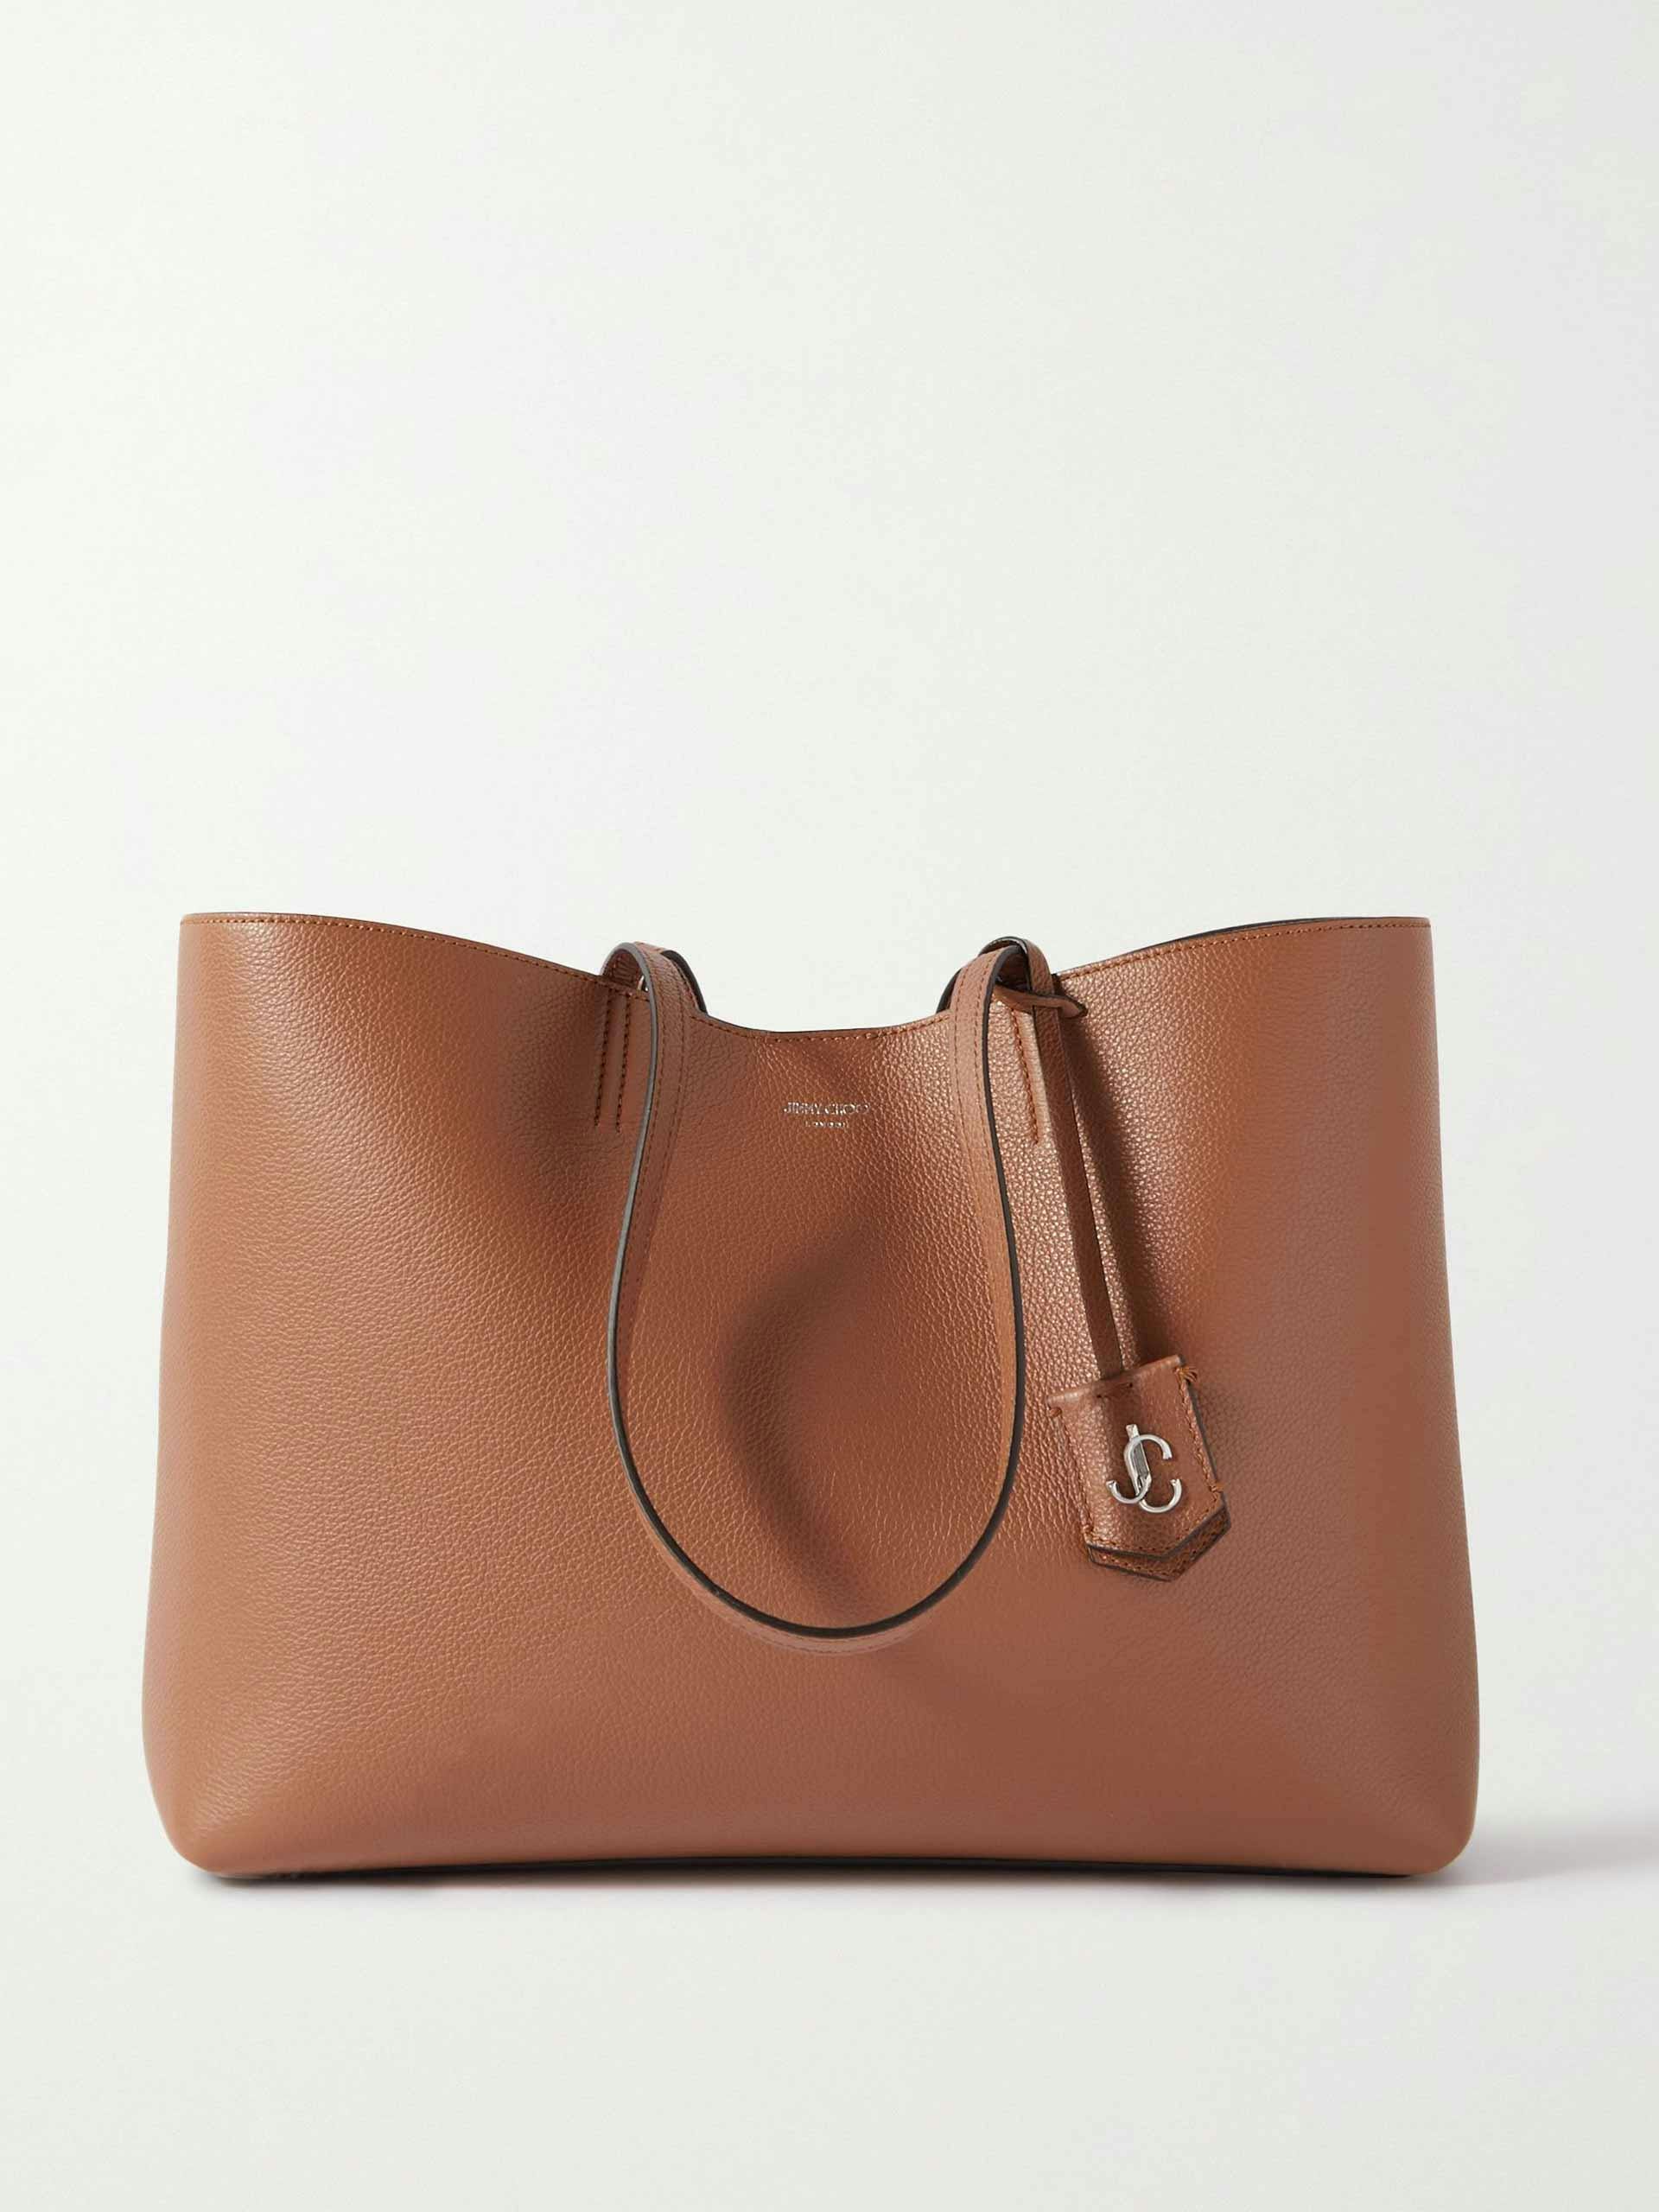 Brown textured leather tote bag